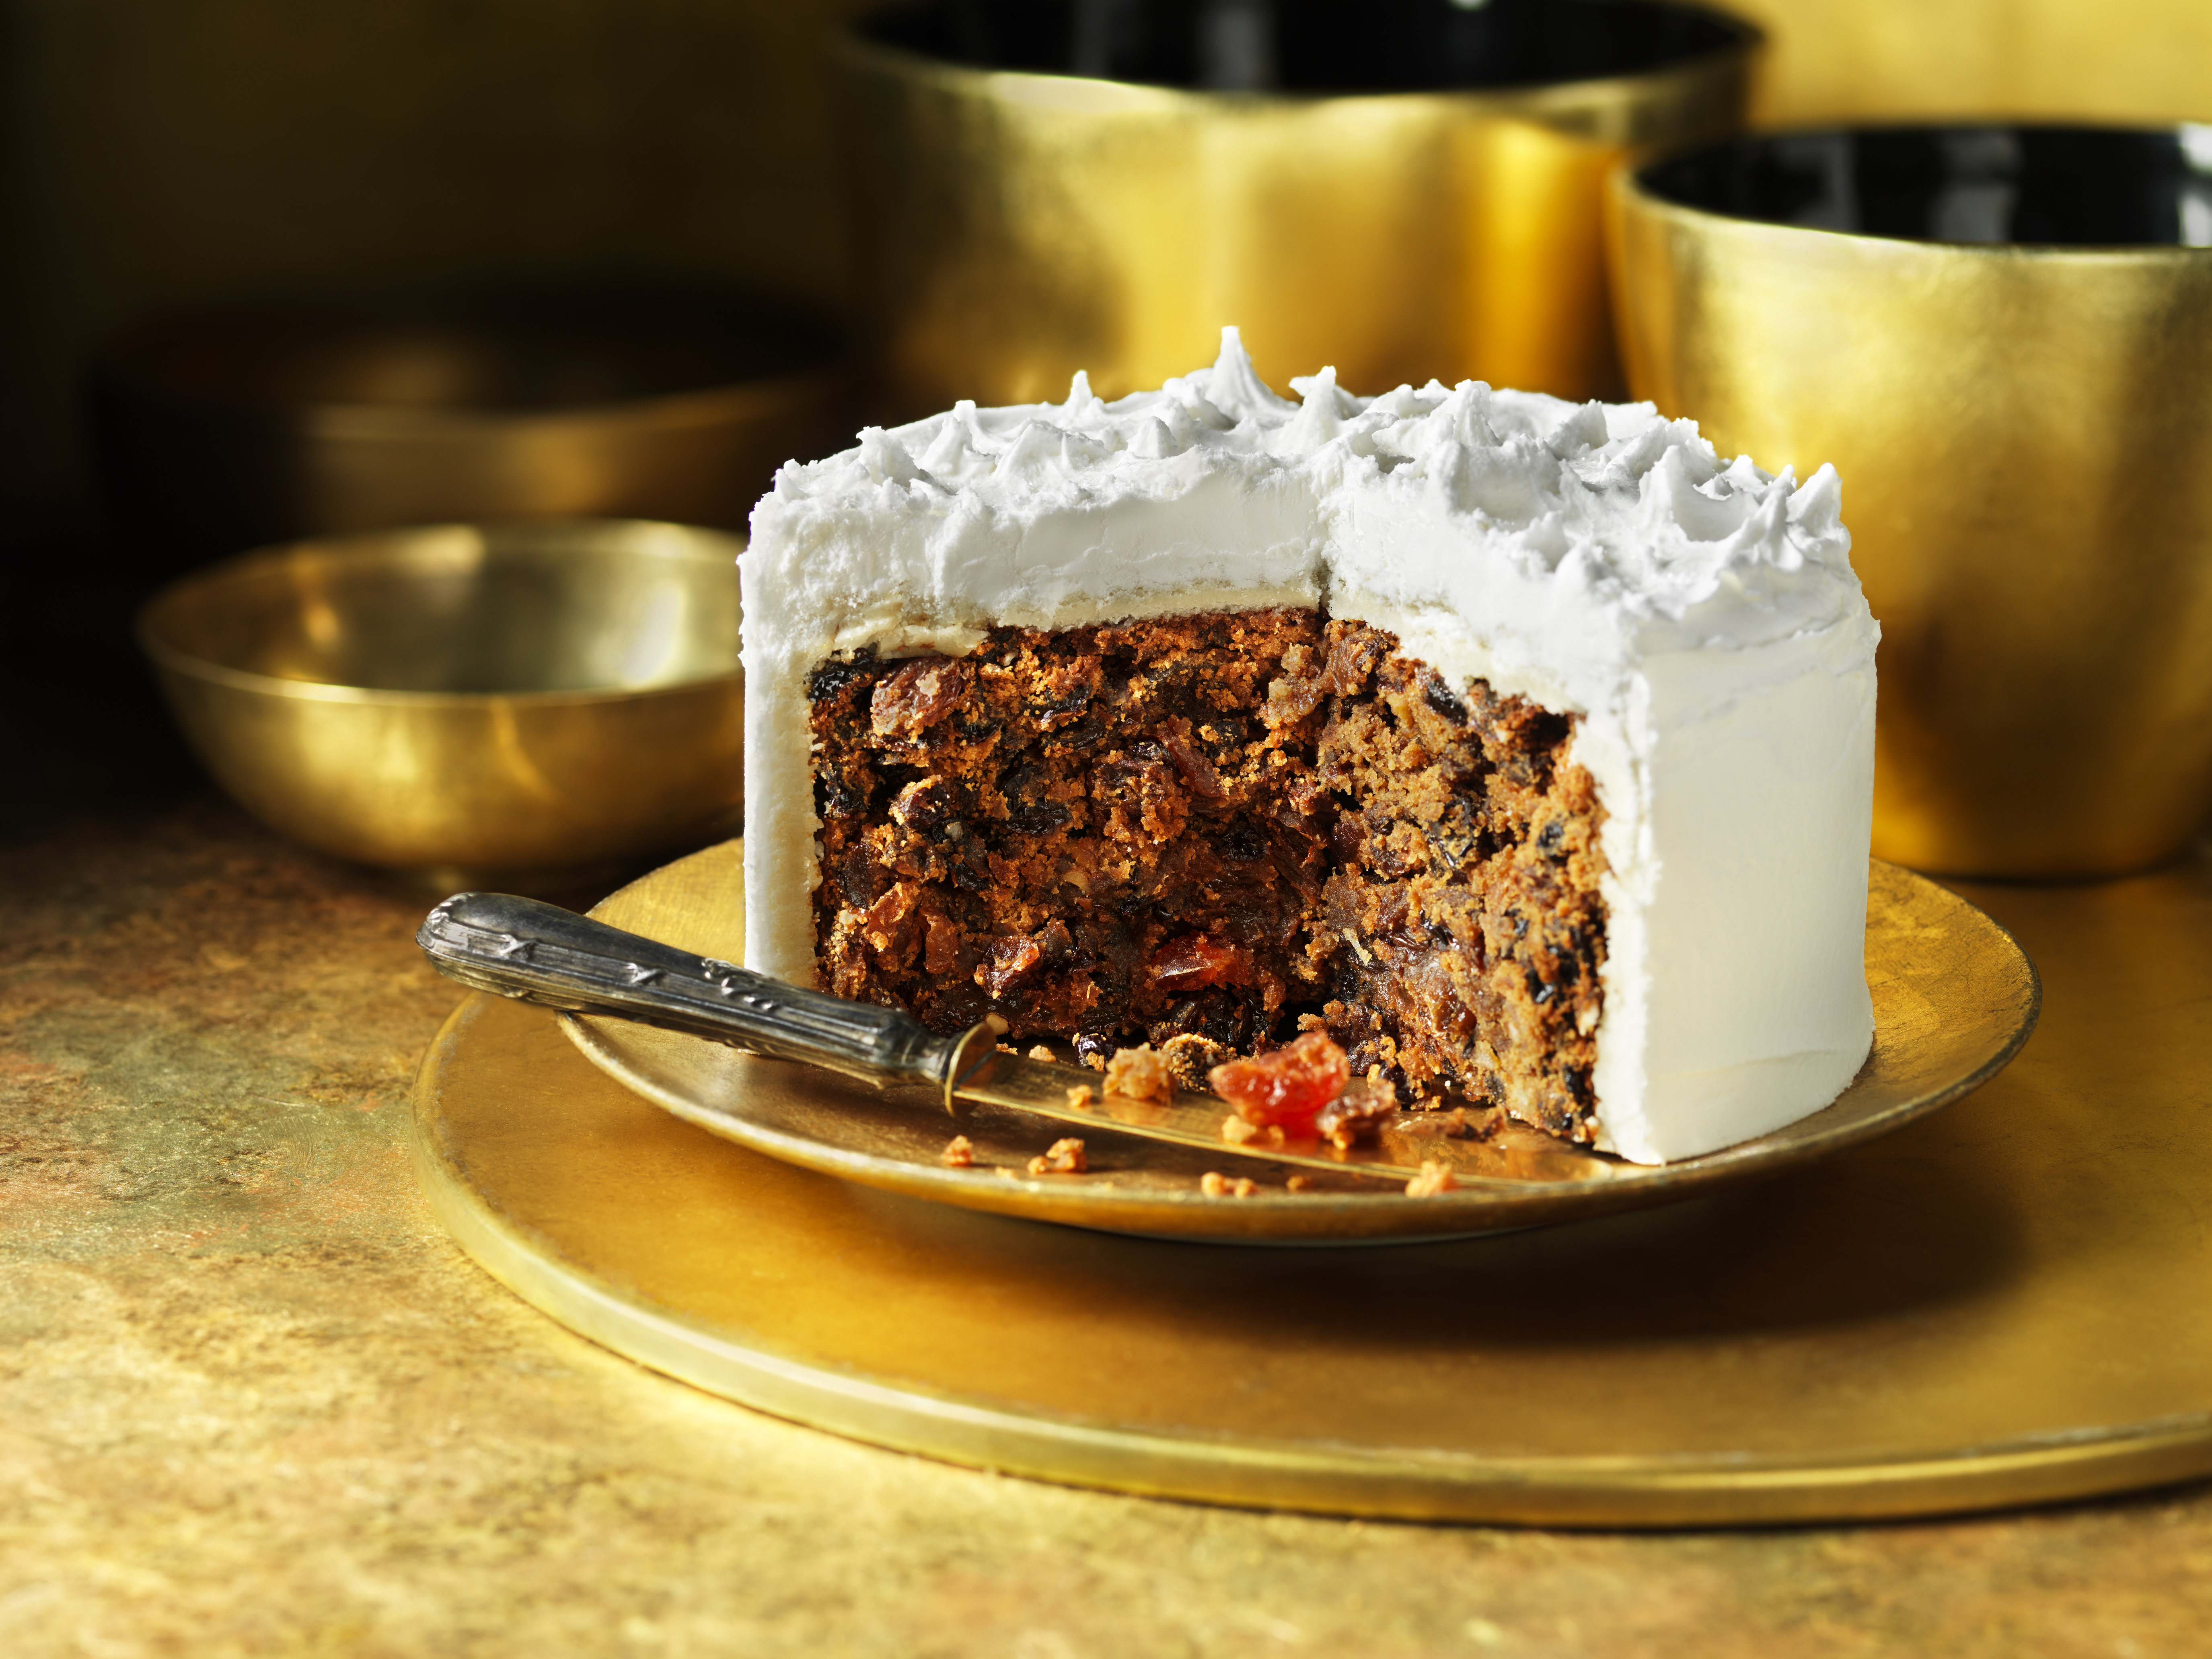 A Christmas fruitcake covered in white icing, sliced open on a gold plate.